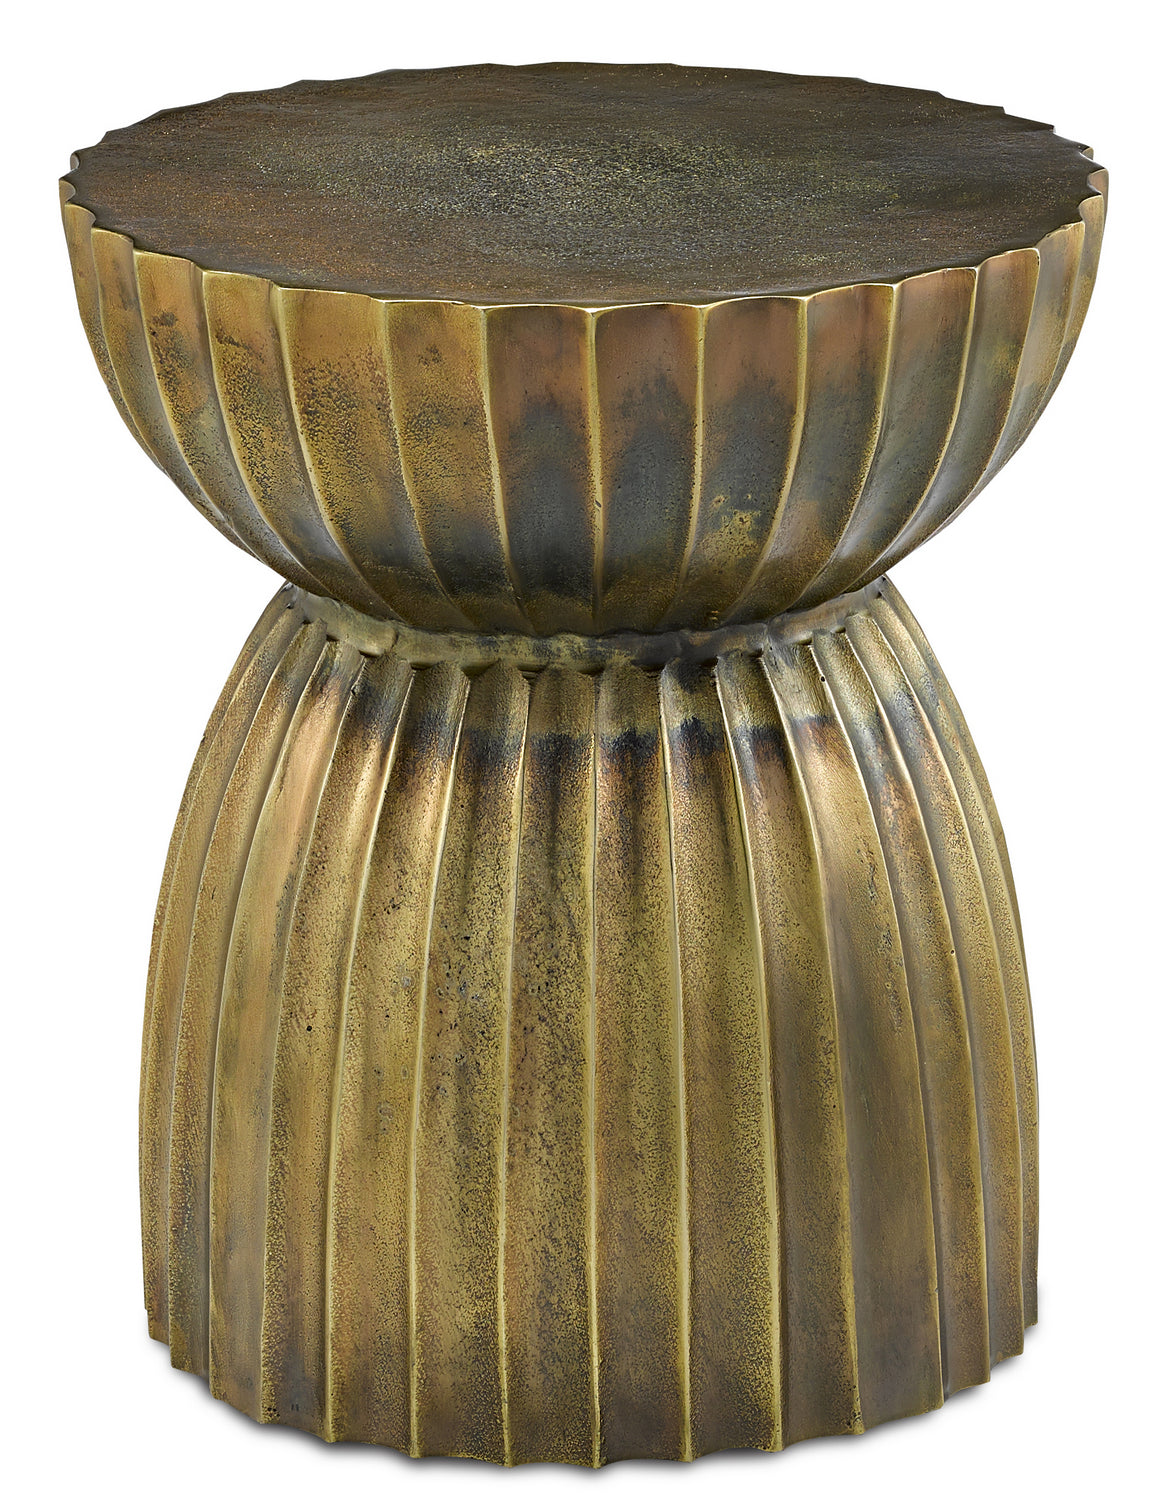 Table/Stool from the Rasi collection in Antique Brass finish